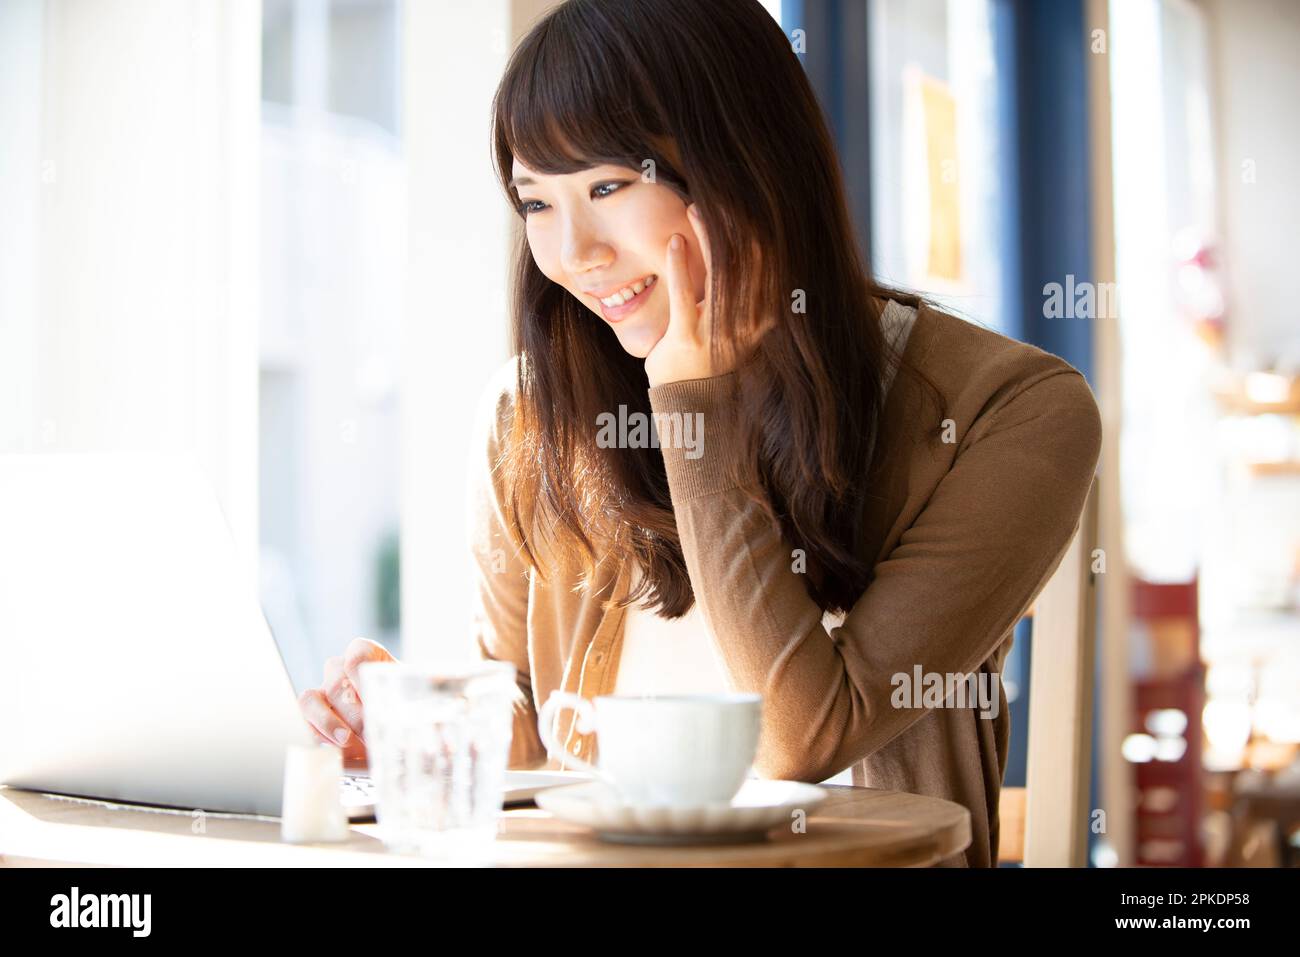 Woman working at a café using a computer Stock Photo